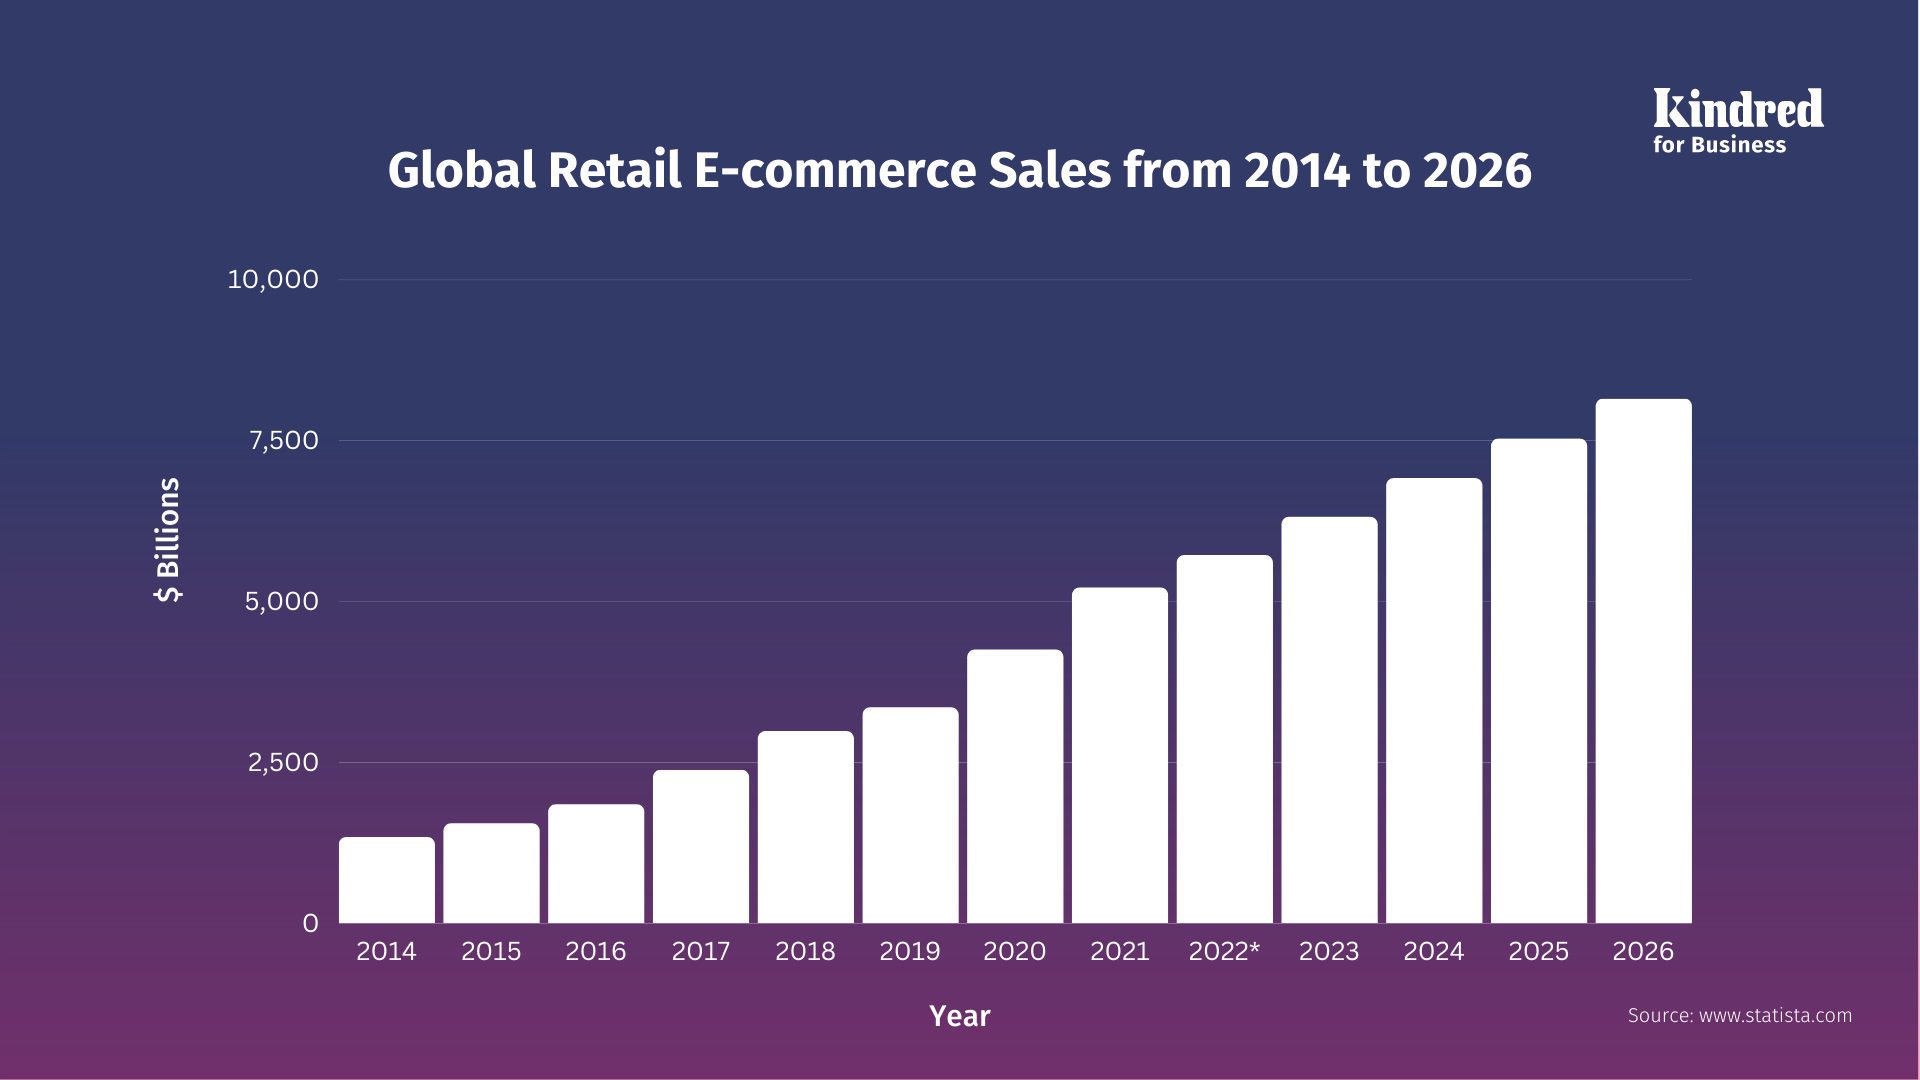 Global retail e-commerce sales and predictions from 2014 to 2026